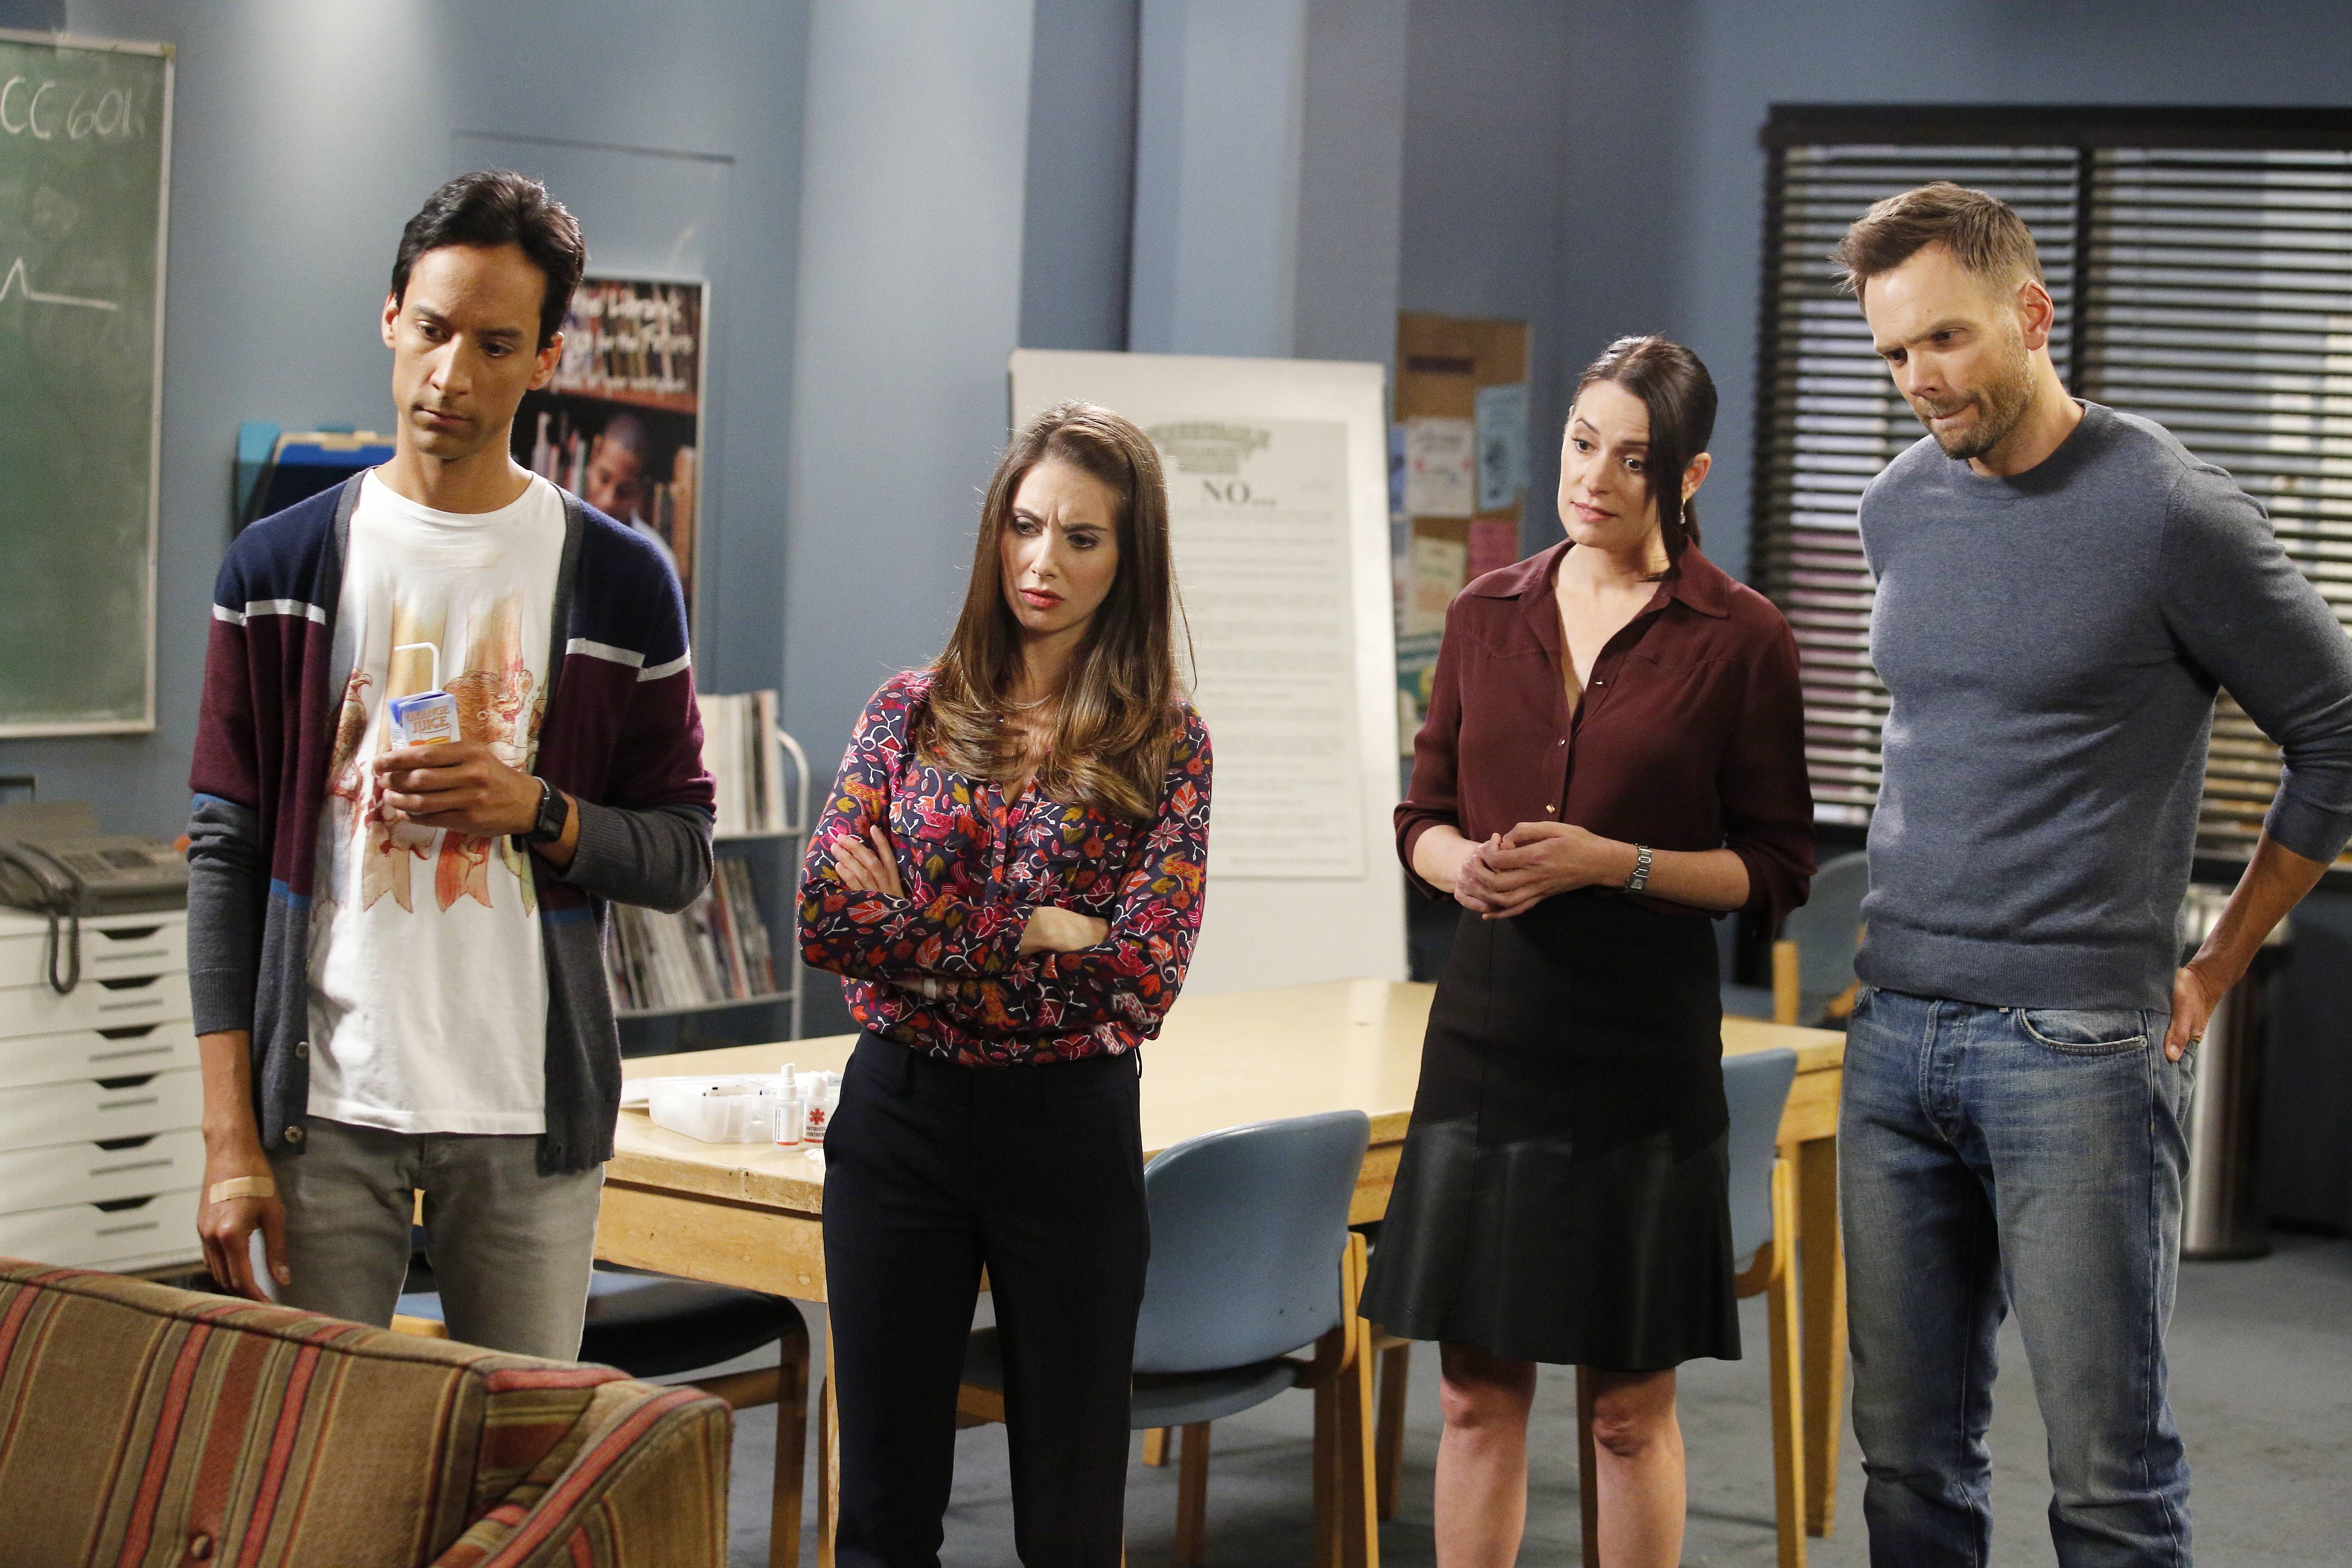 Pudi, Alison Brie, Brewster and McHale in the new season of Community (Trae Patton/Yahoo/Sony)